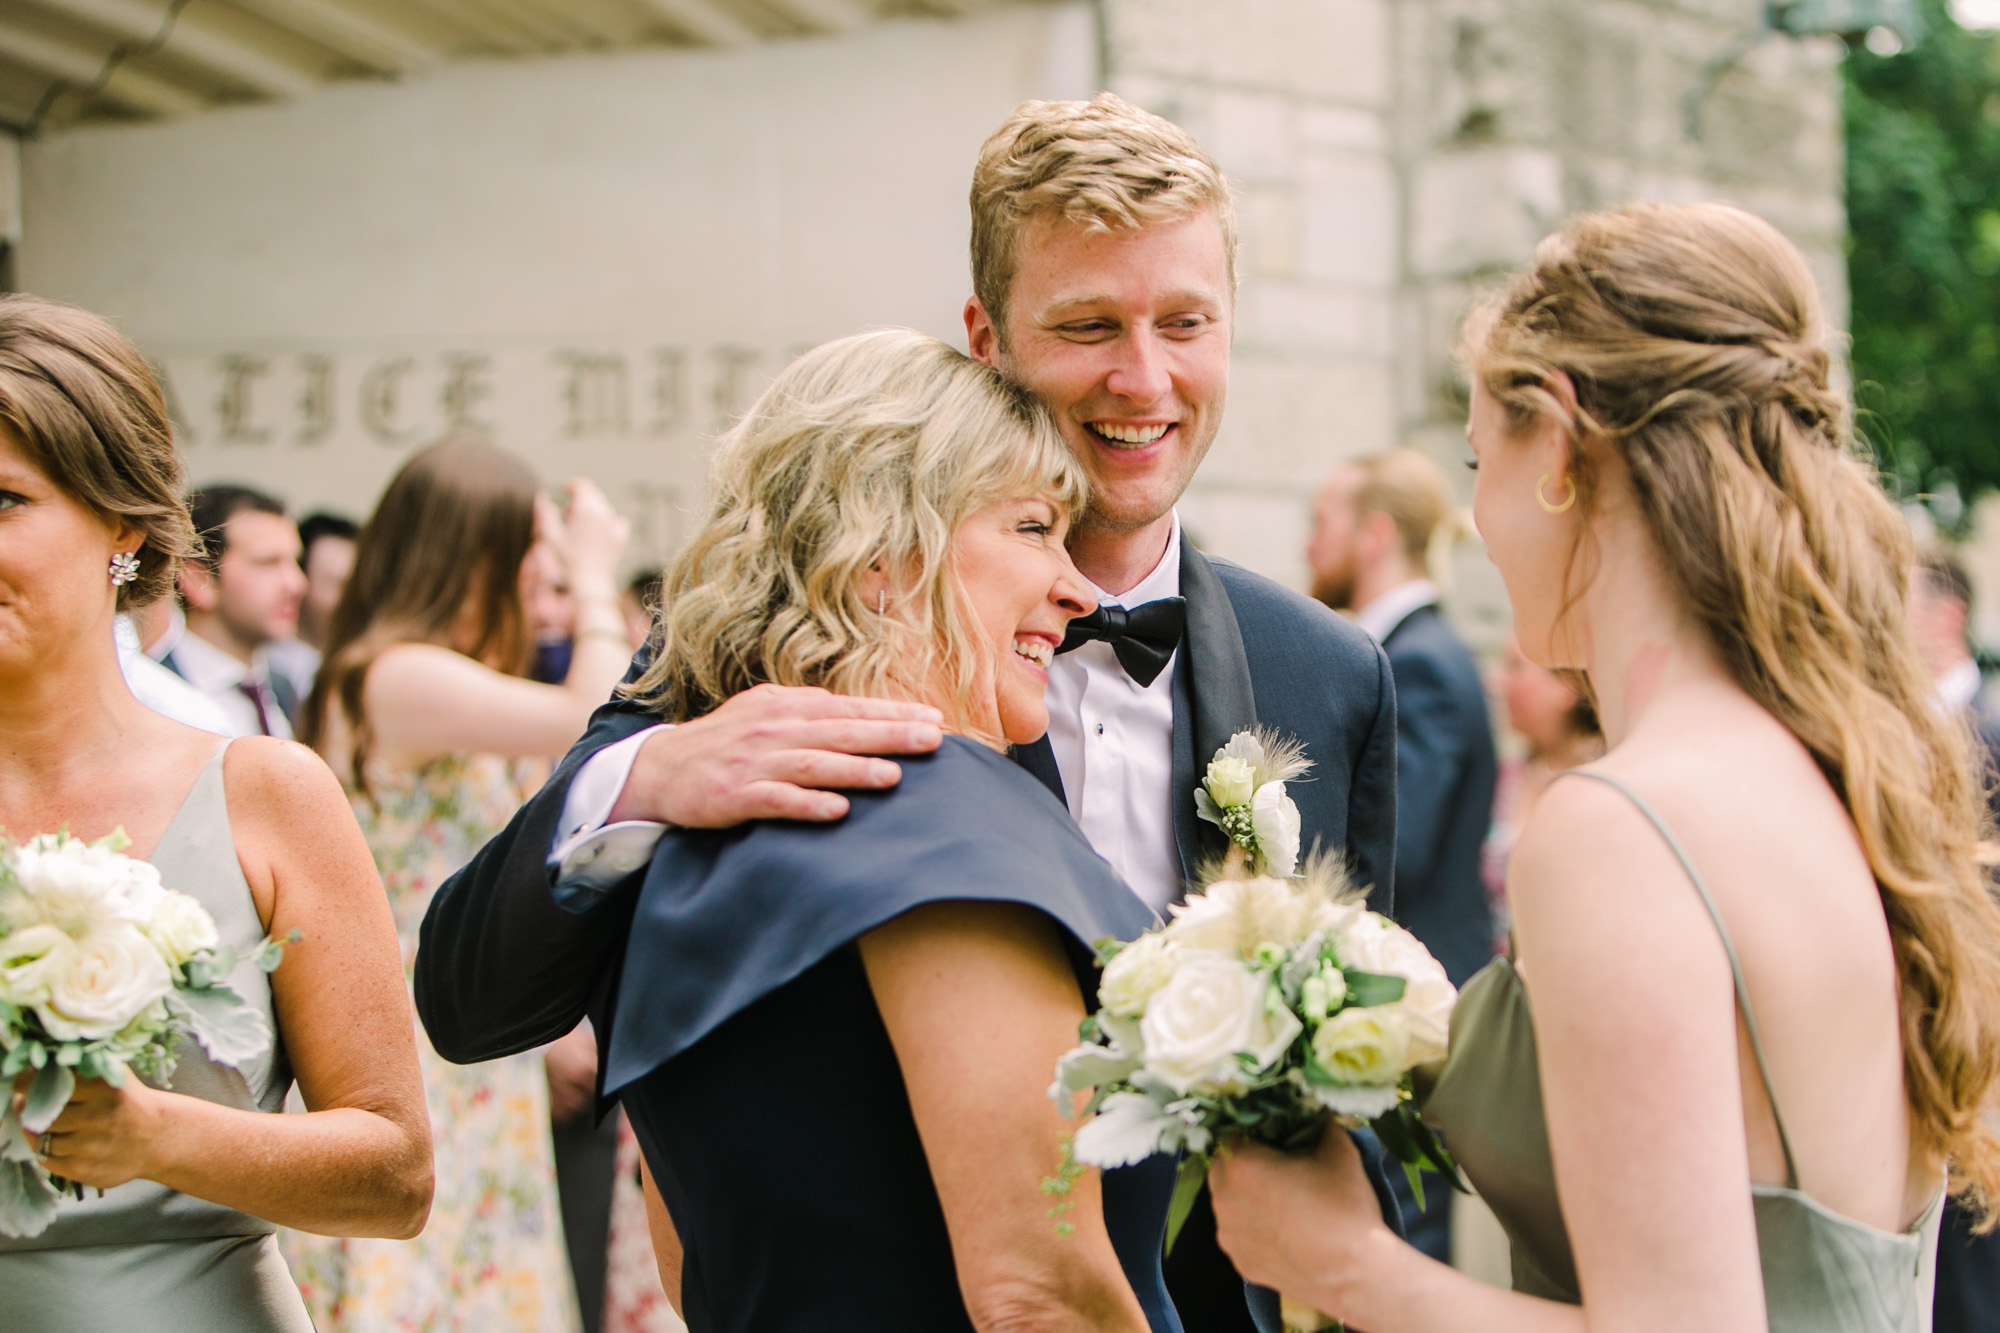 A groom hugs his mom after getting married at a wedding ceremony in Evanston, IL.